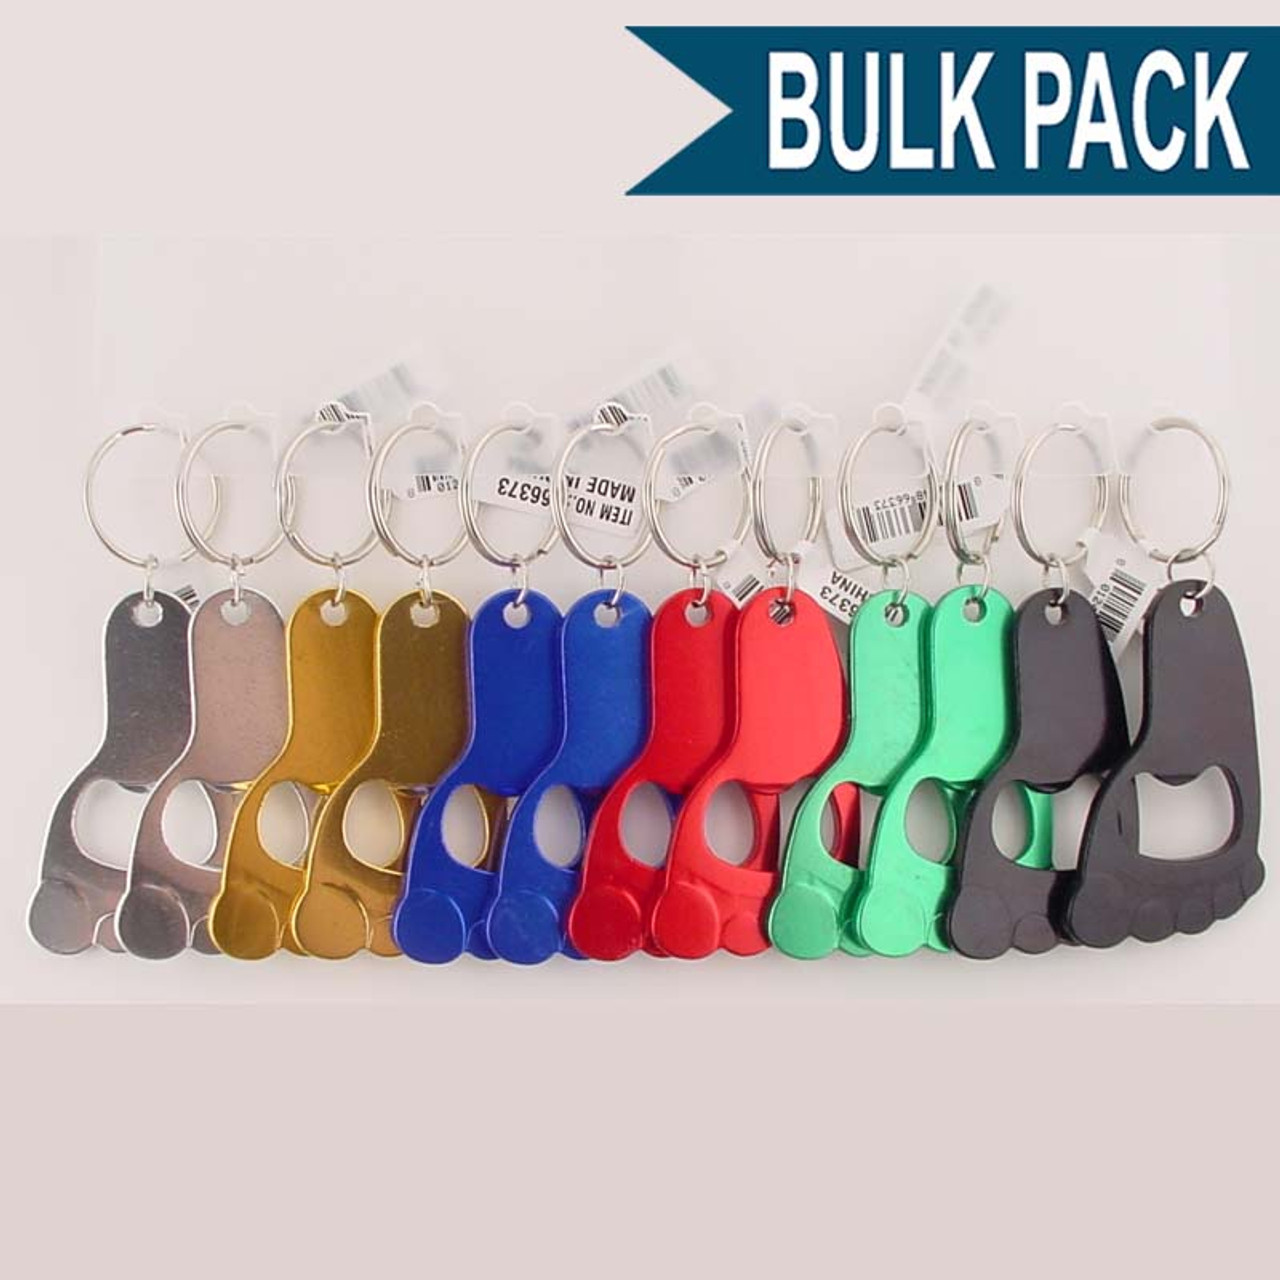 Plastic Snap Clip Keychains